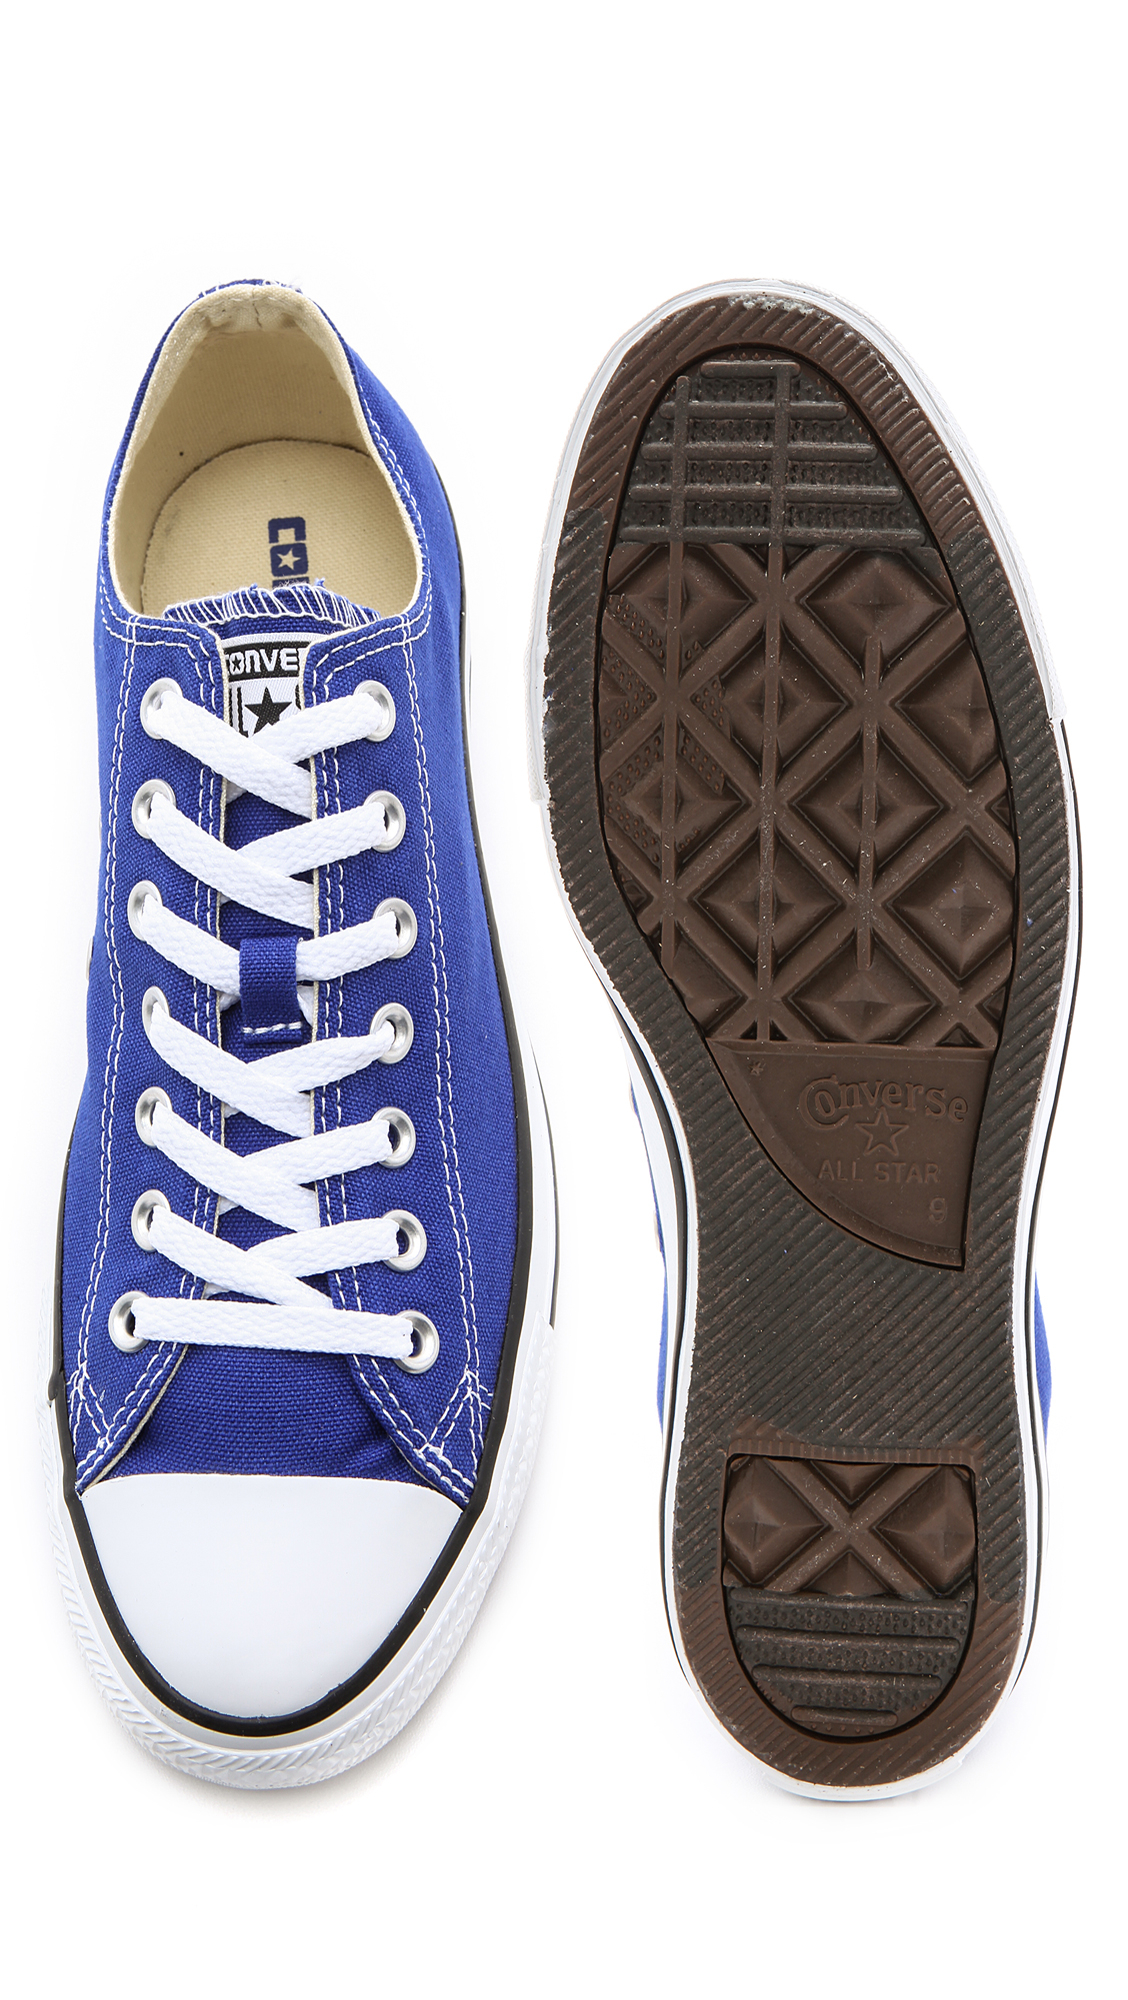 Converse Chuck Taylor All Star Sneakers in Blue for Men - Lyst